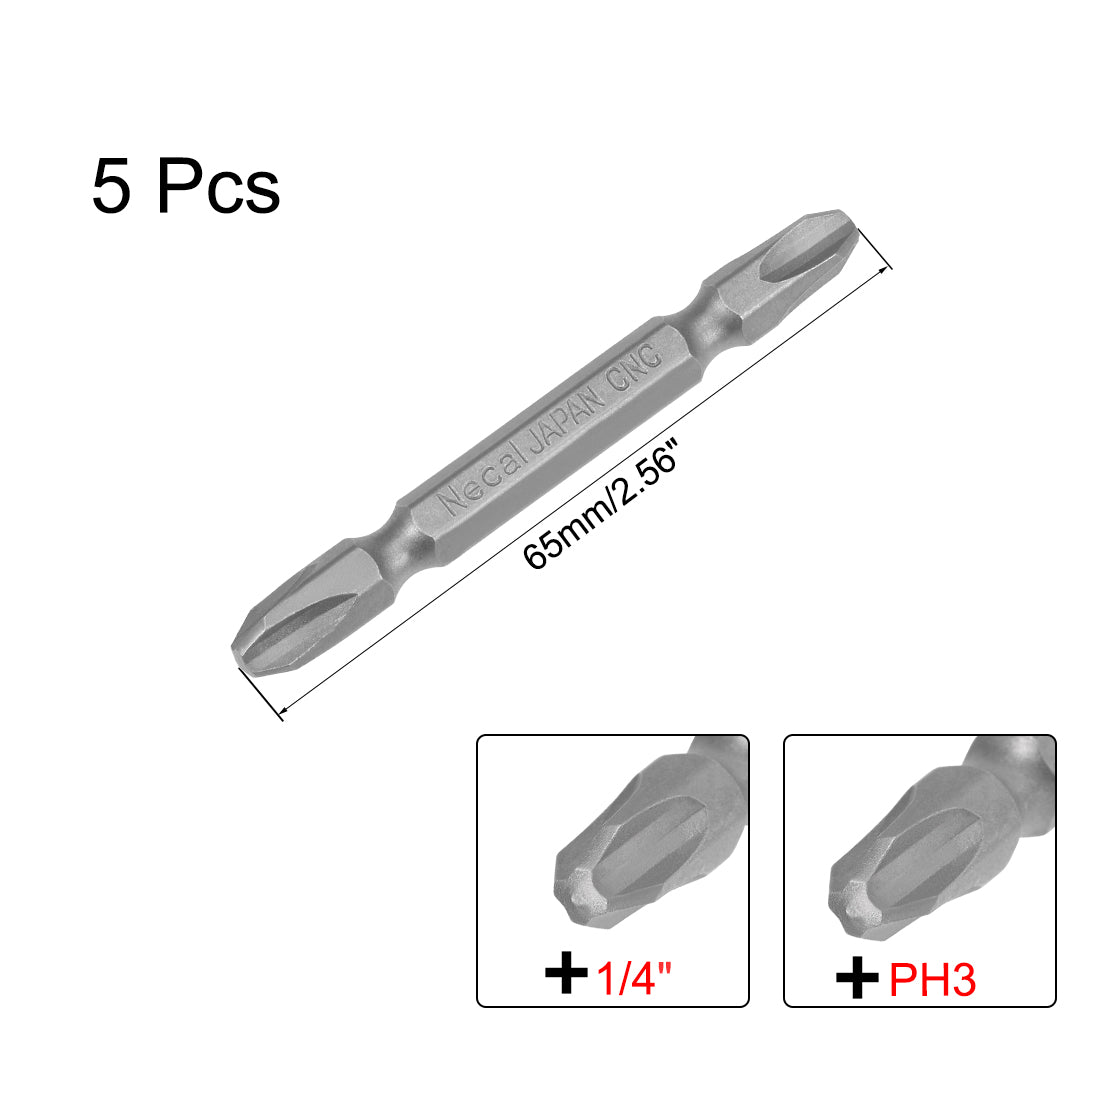 Uxcell Uxcell Phillips Bits 1/4-Inch Hex Shank 65mm Length Cross PH3 Double-Head Magnetic Screw Driver S2 Screwdriver Bit 5Pcs